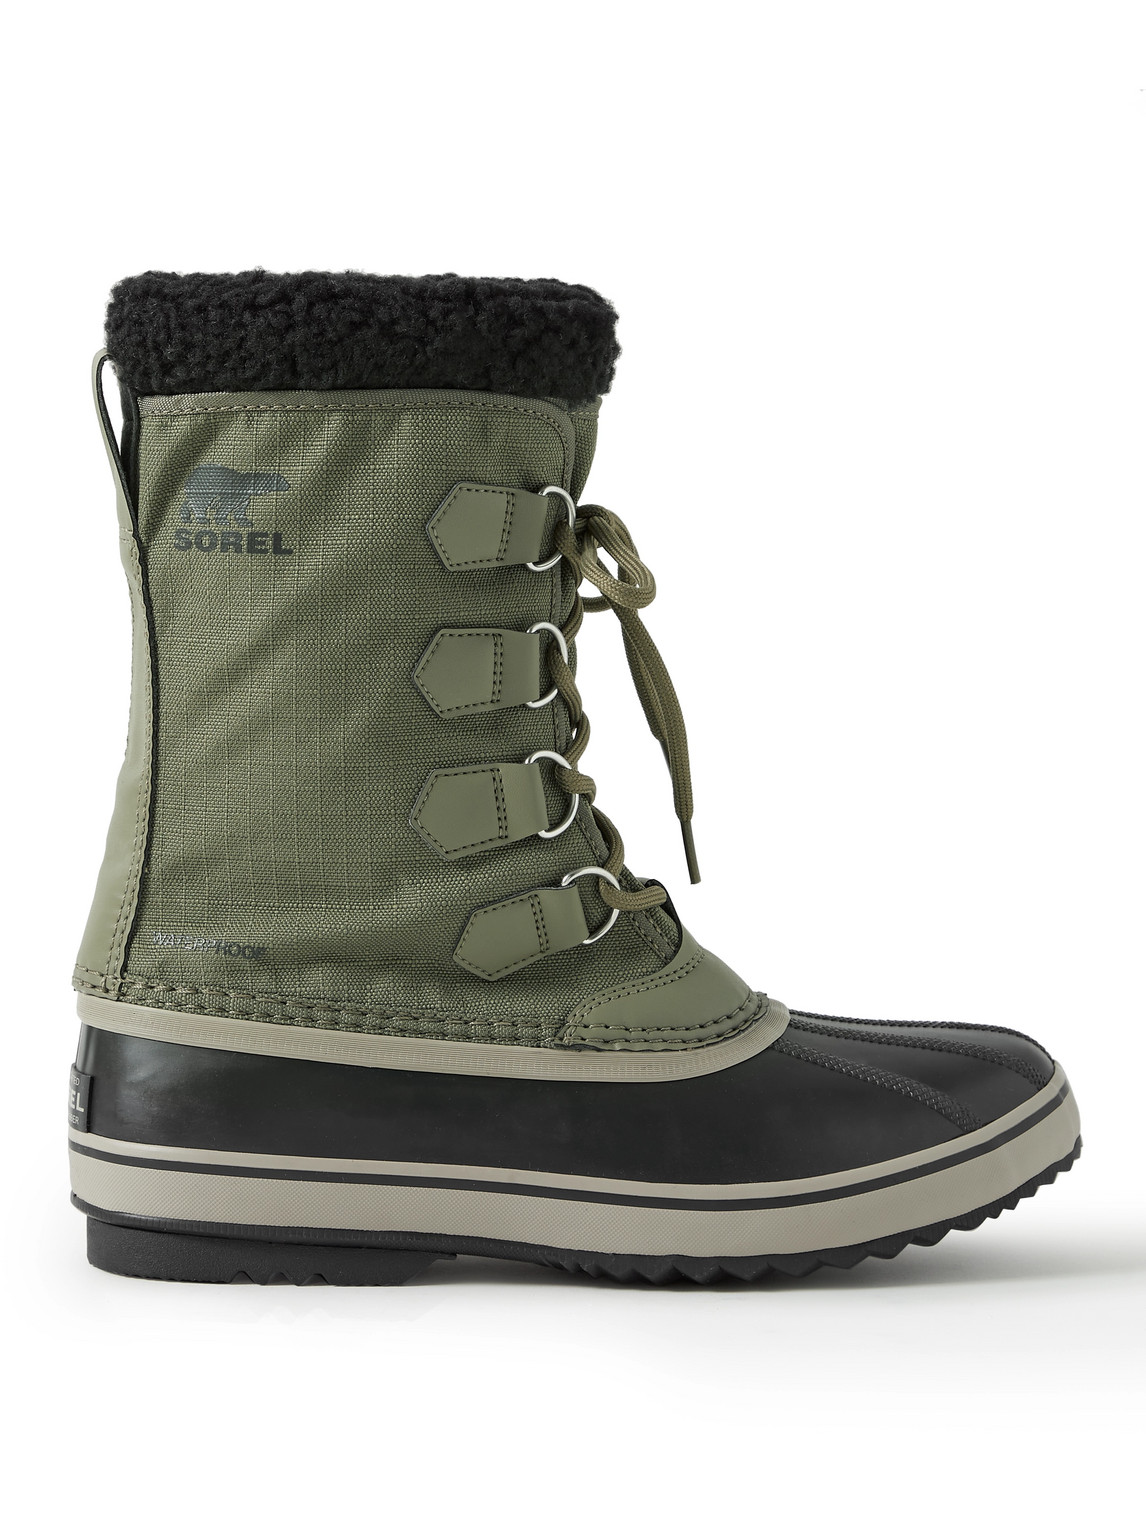 SOREL 1964 PAC™ FAUX SHEARLING-TRIMMED NYLON-RIPSTOP AND RUBBER SNOW BOOTS